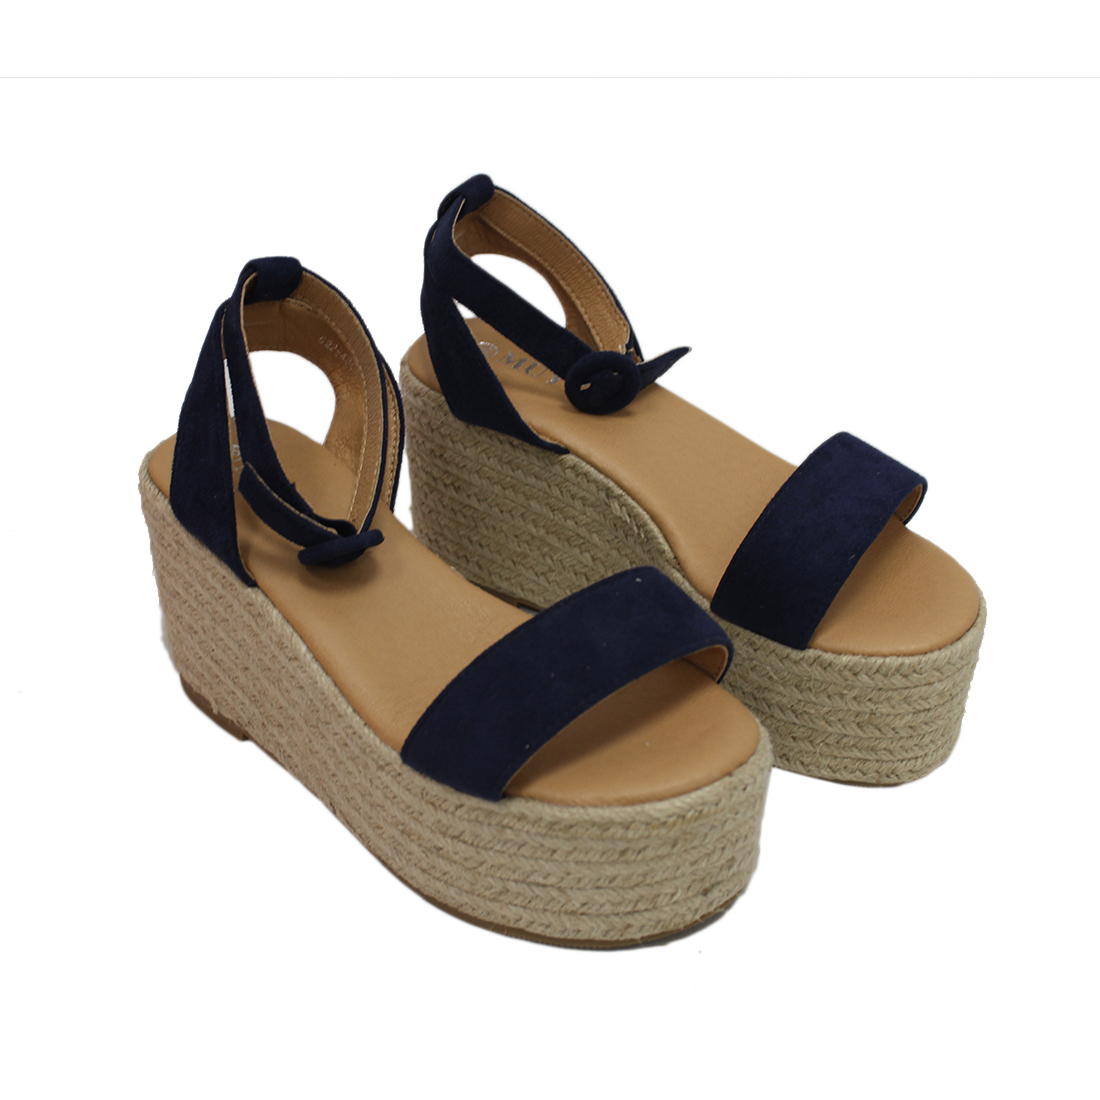 High wedge with plain strap infront- sued material